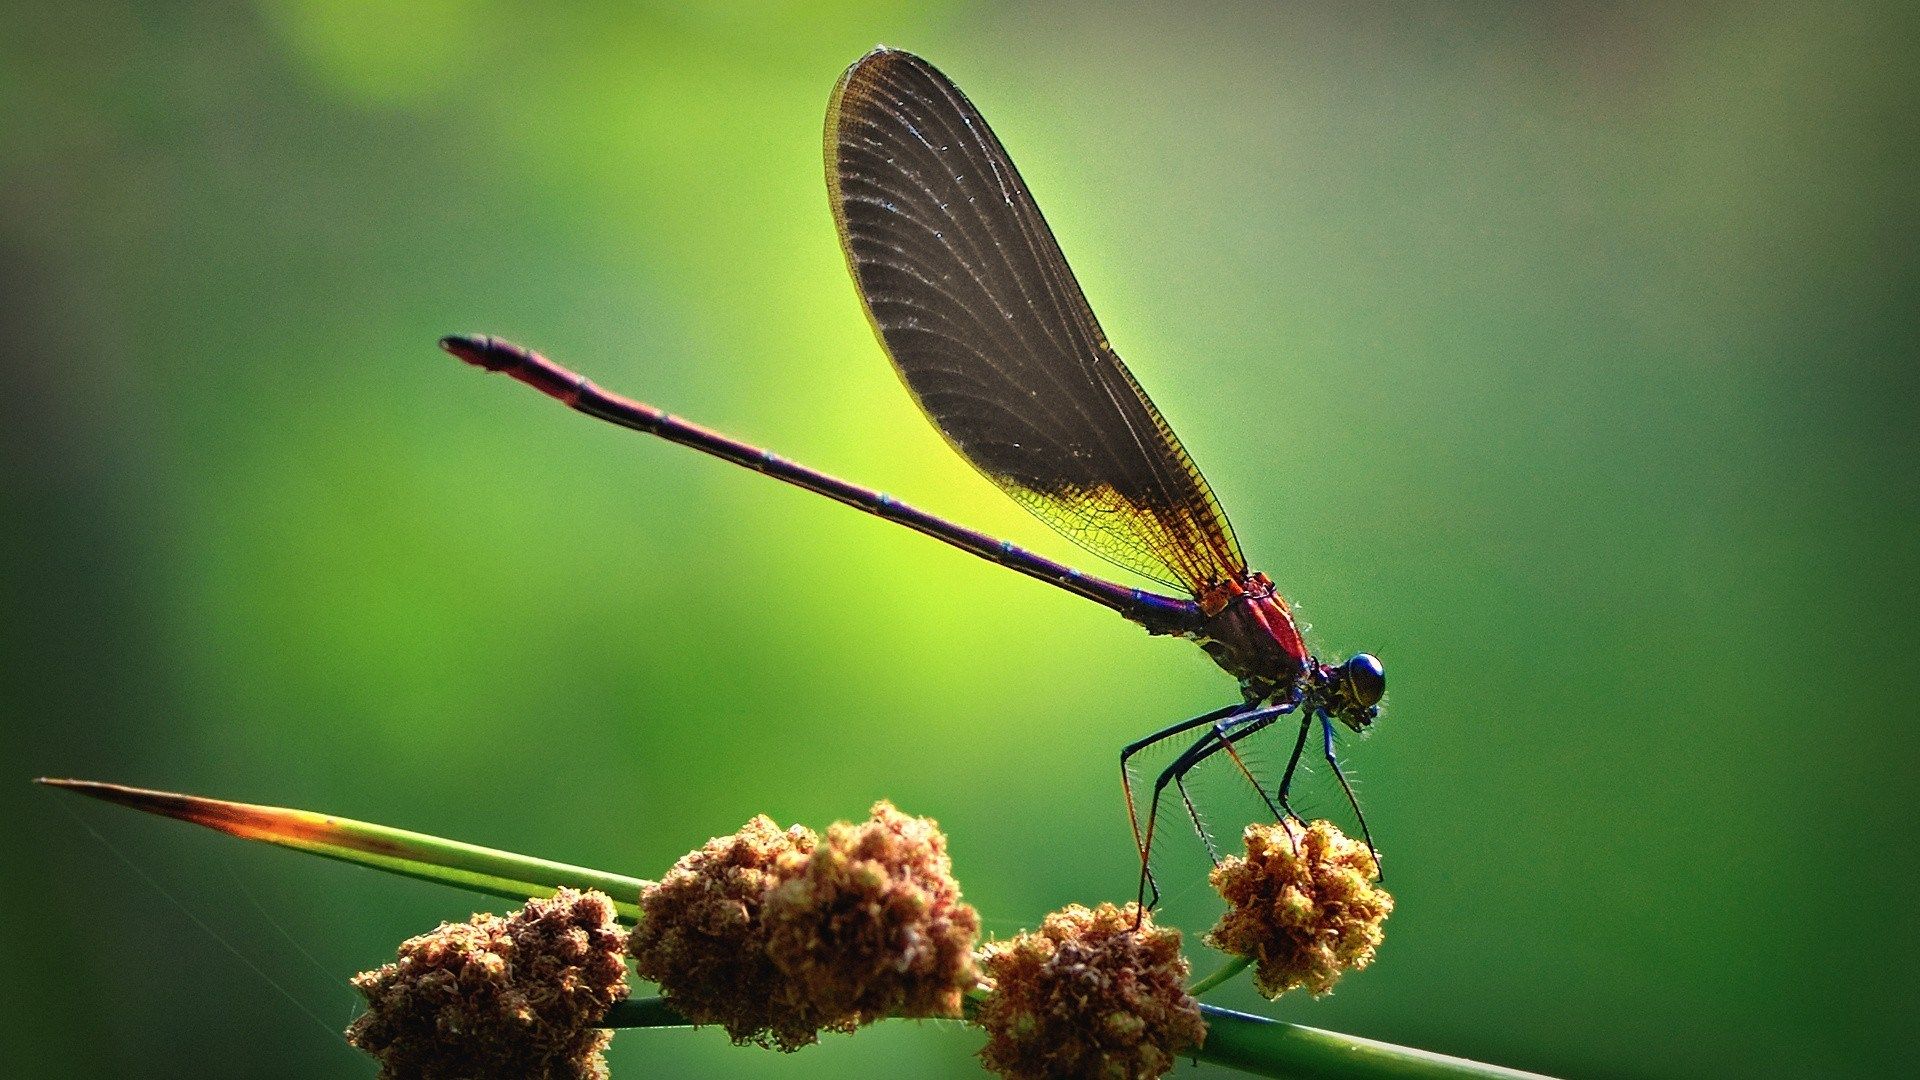 HD wallpaper, Dragonfly, Insect